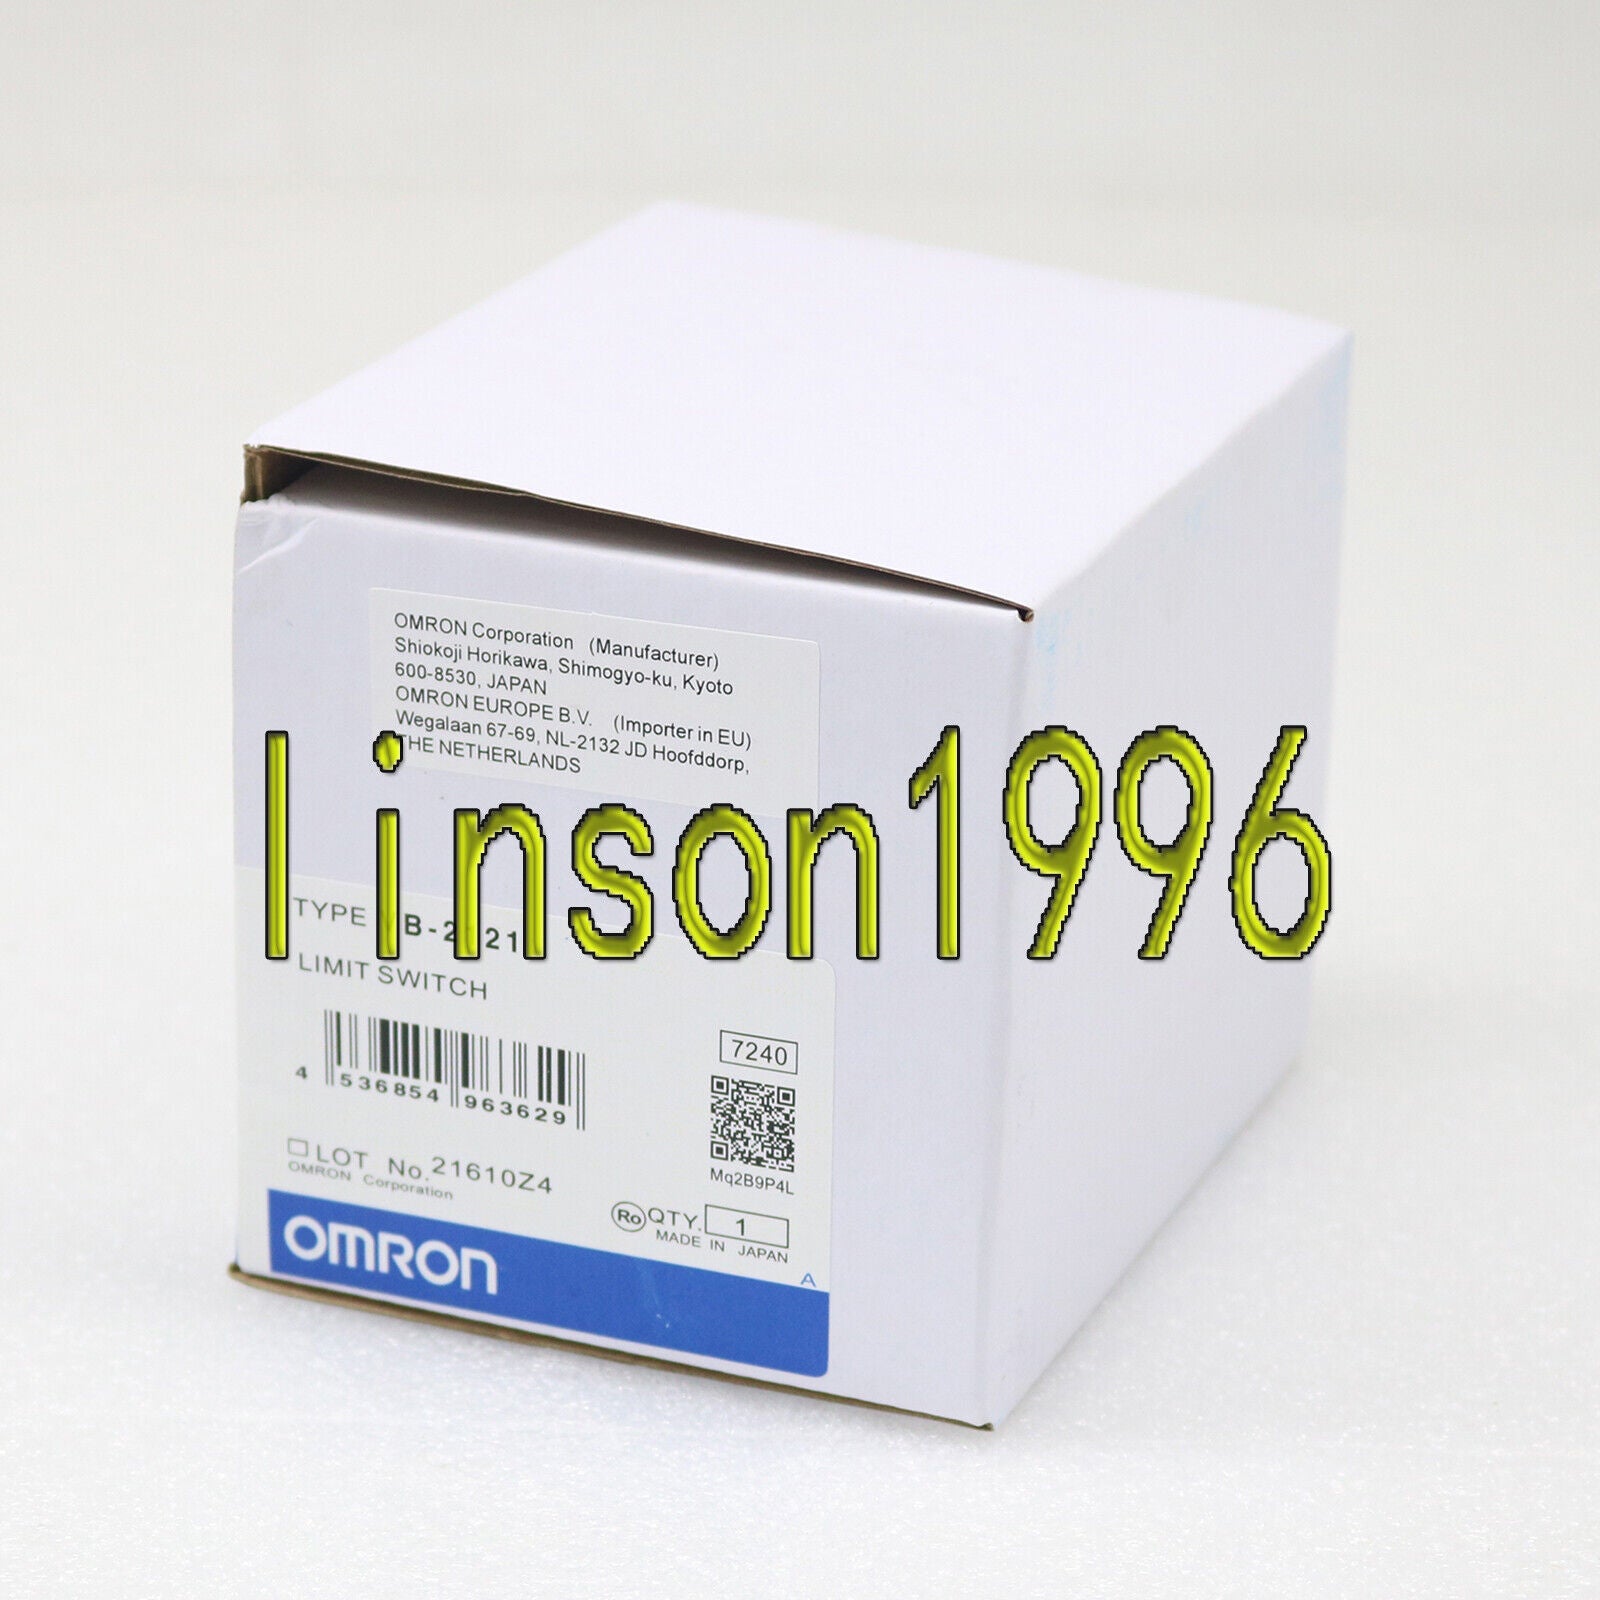 new  Omron limit switch In Box VB-2121 bestplc